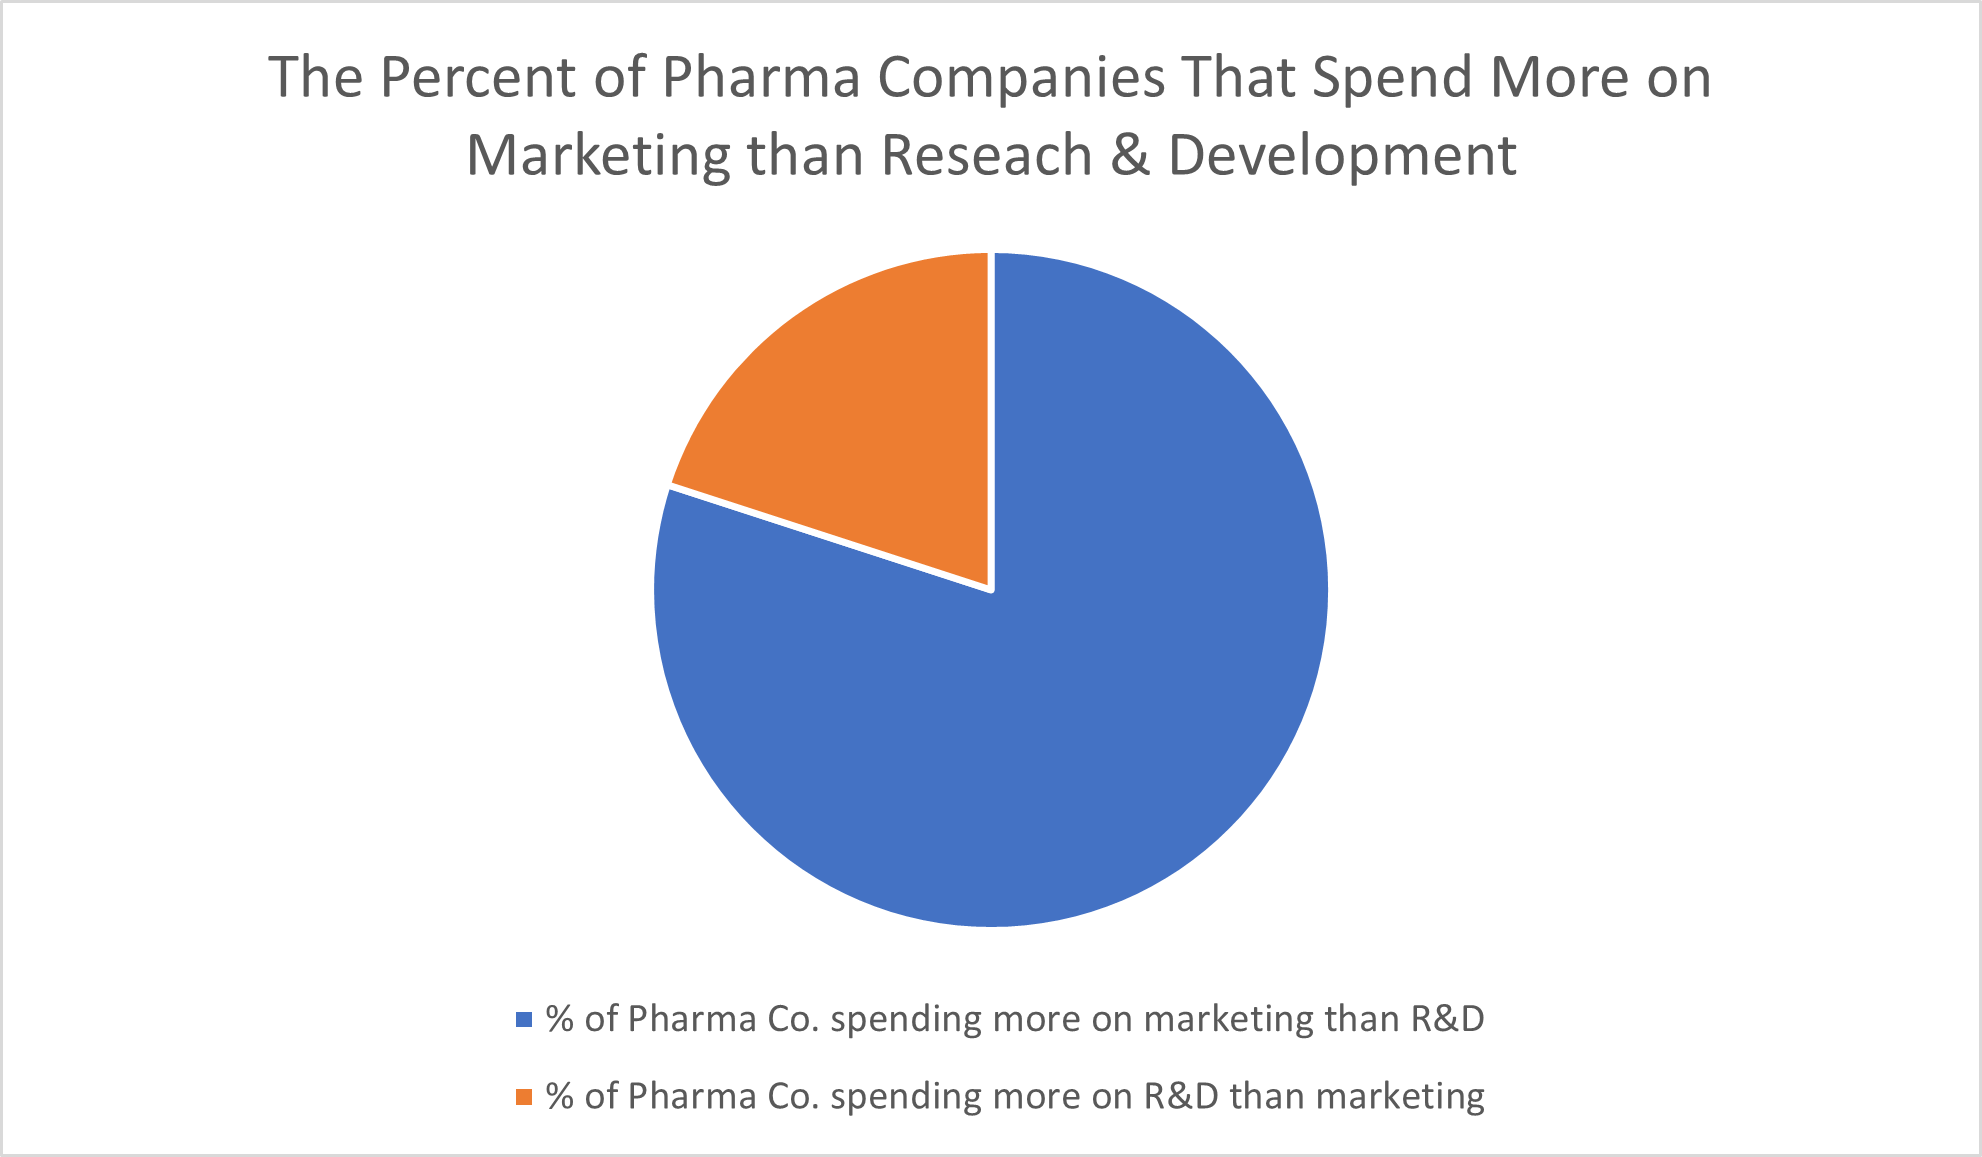 The Percent of Pharma Companies That Spend More on Marketing than Reseach & Development